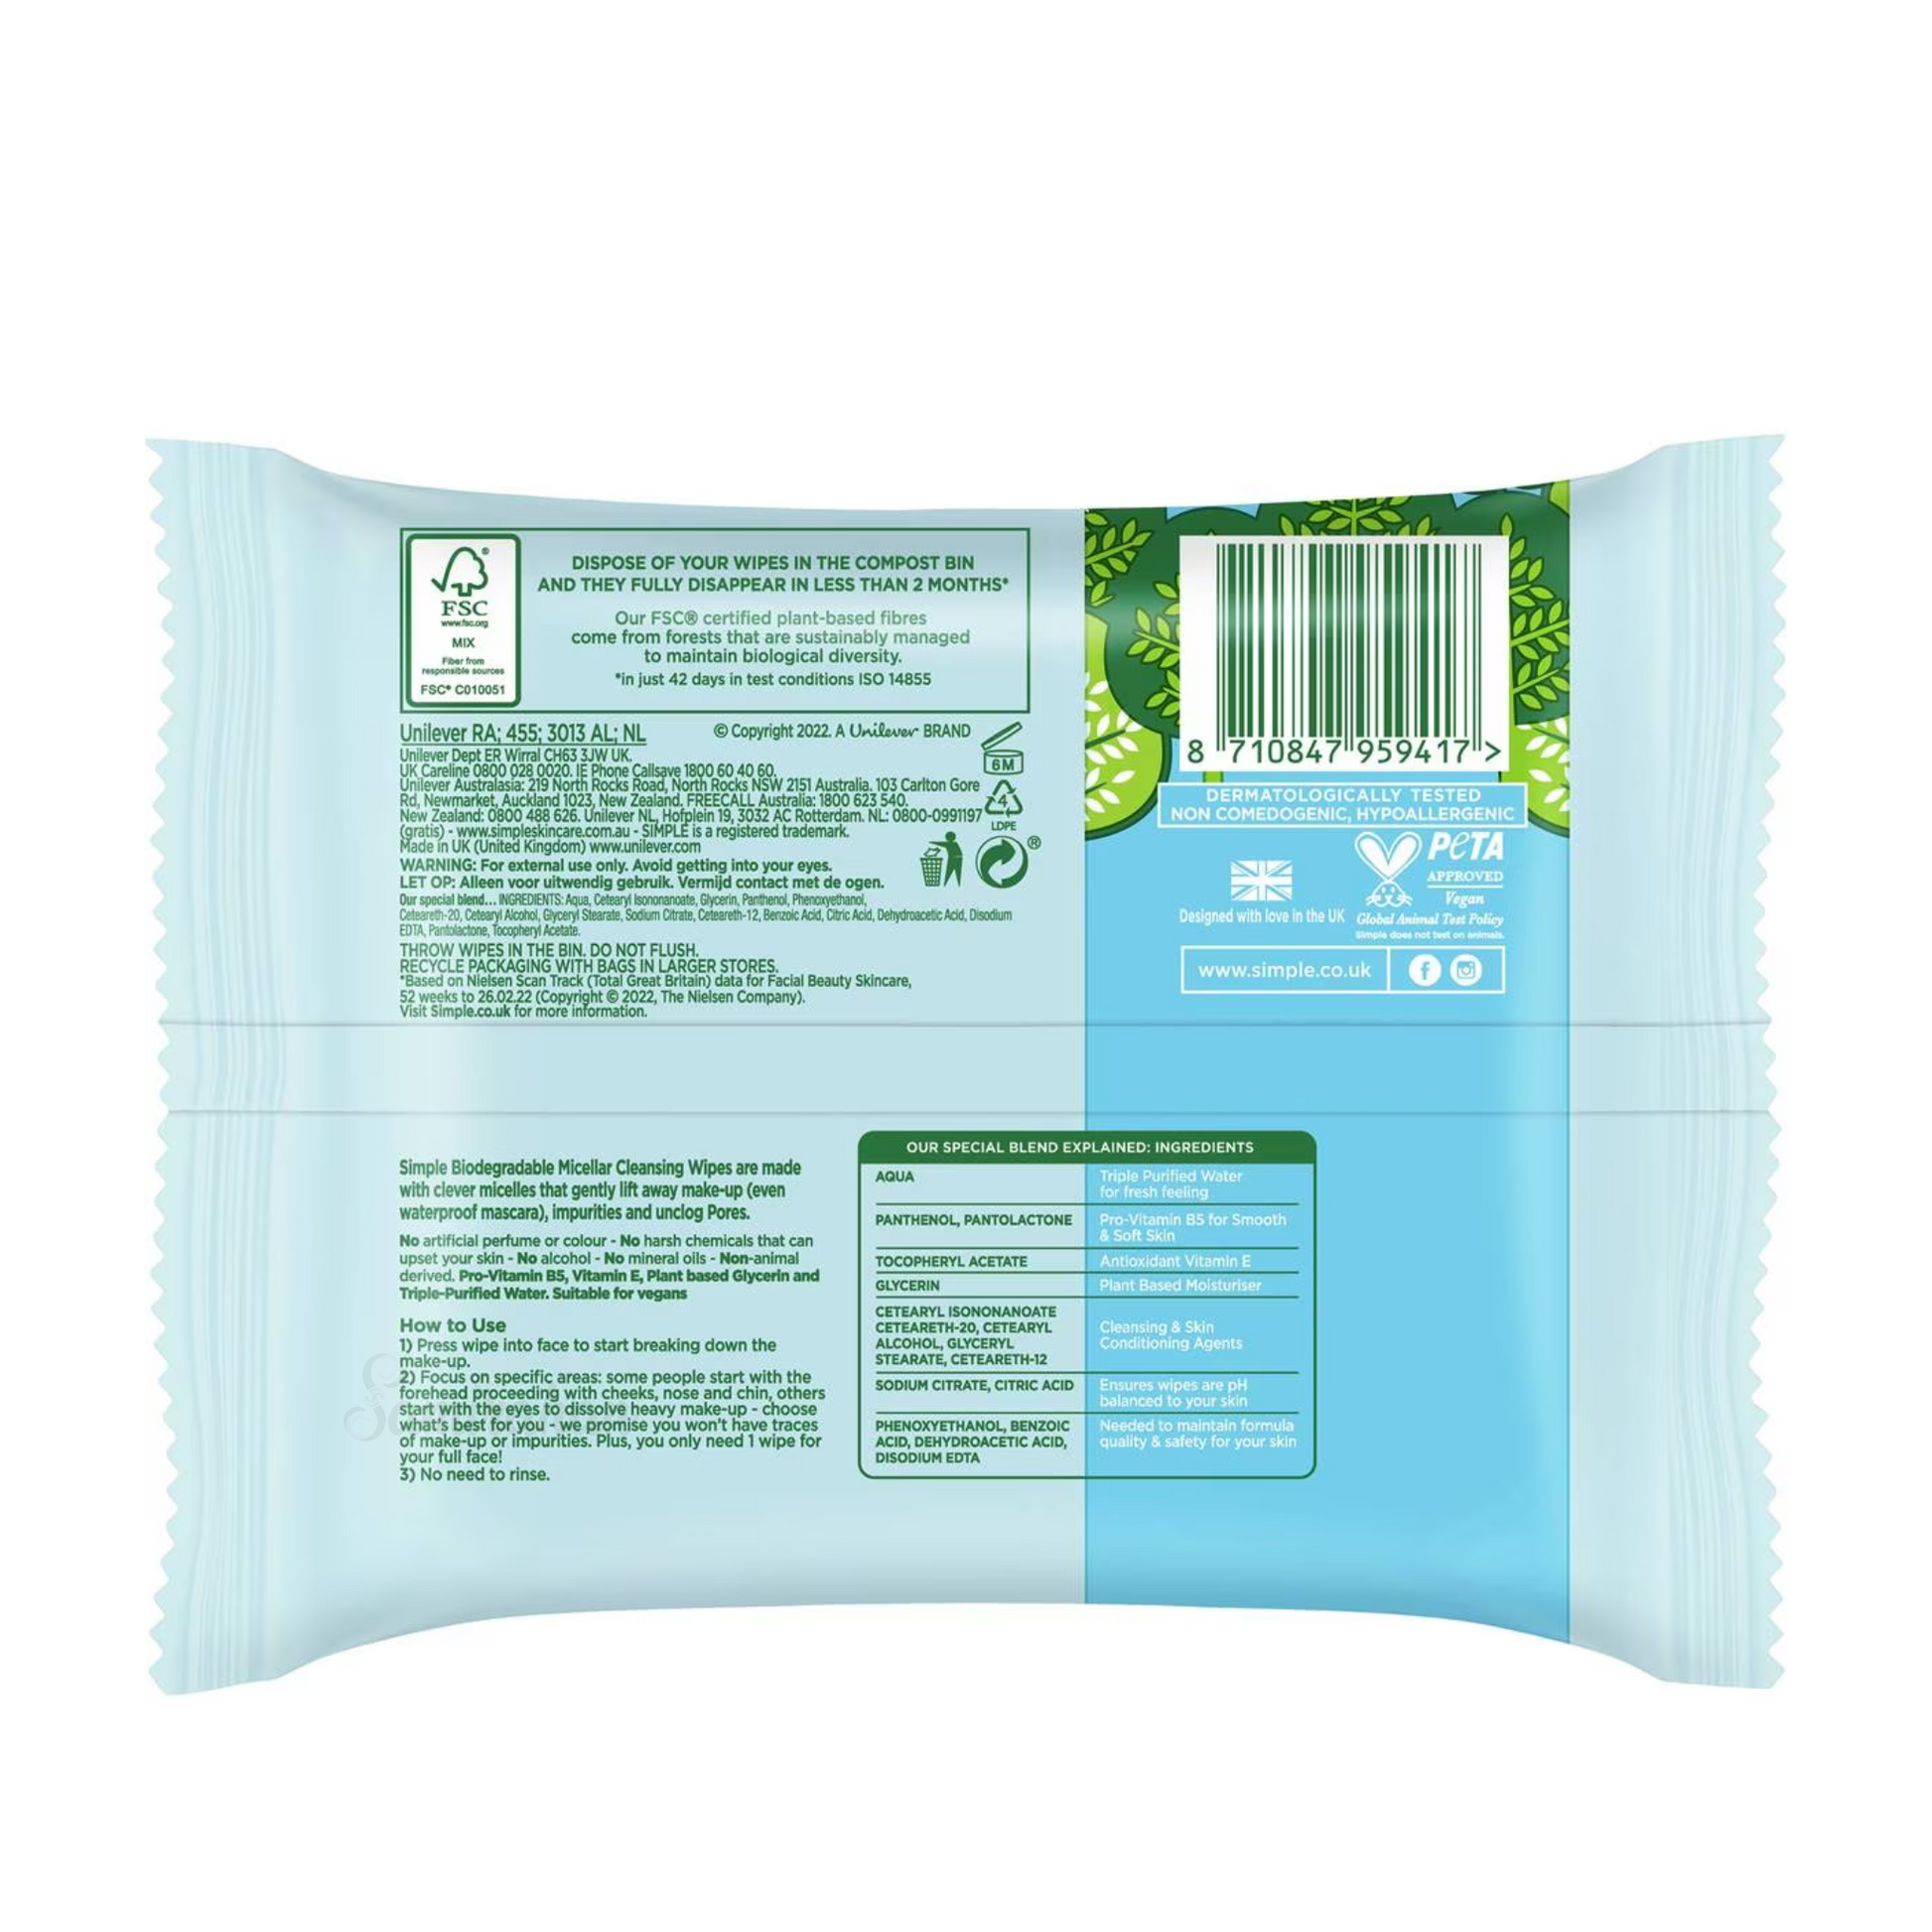 Simple Kind to Skin Micellar Water Wipes effectively cleanses grease, impurities & make-up, even waterproof mascara. They leave skin feeling clean, fresh & instantly hydrated. With Pro-Vitamin B5 & Vitamin E. Unscented. No alcohol or harsh chemicals. Dermatologically tested. Best make up remover wipe Dhaka Bangladesh.